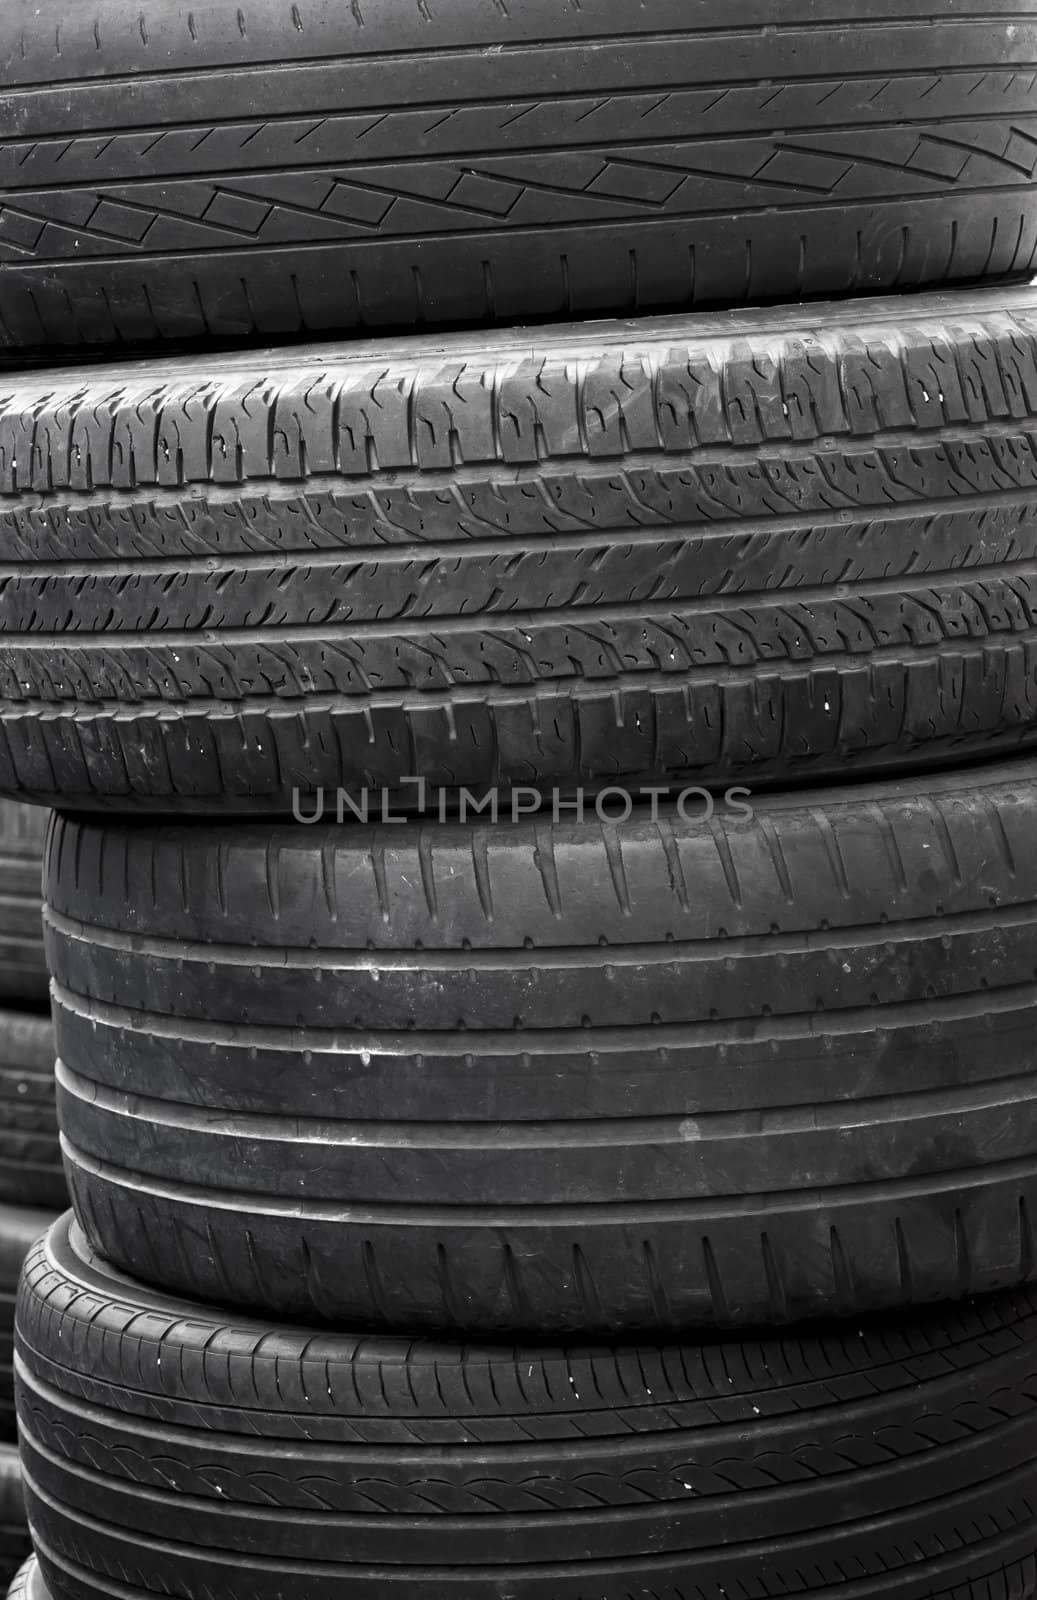 A stack of worn out rubber tire 